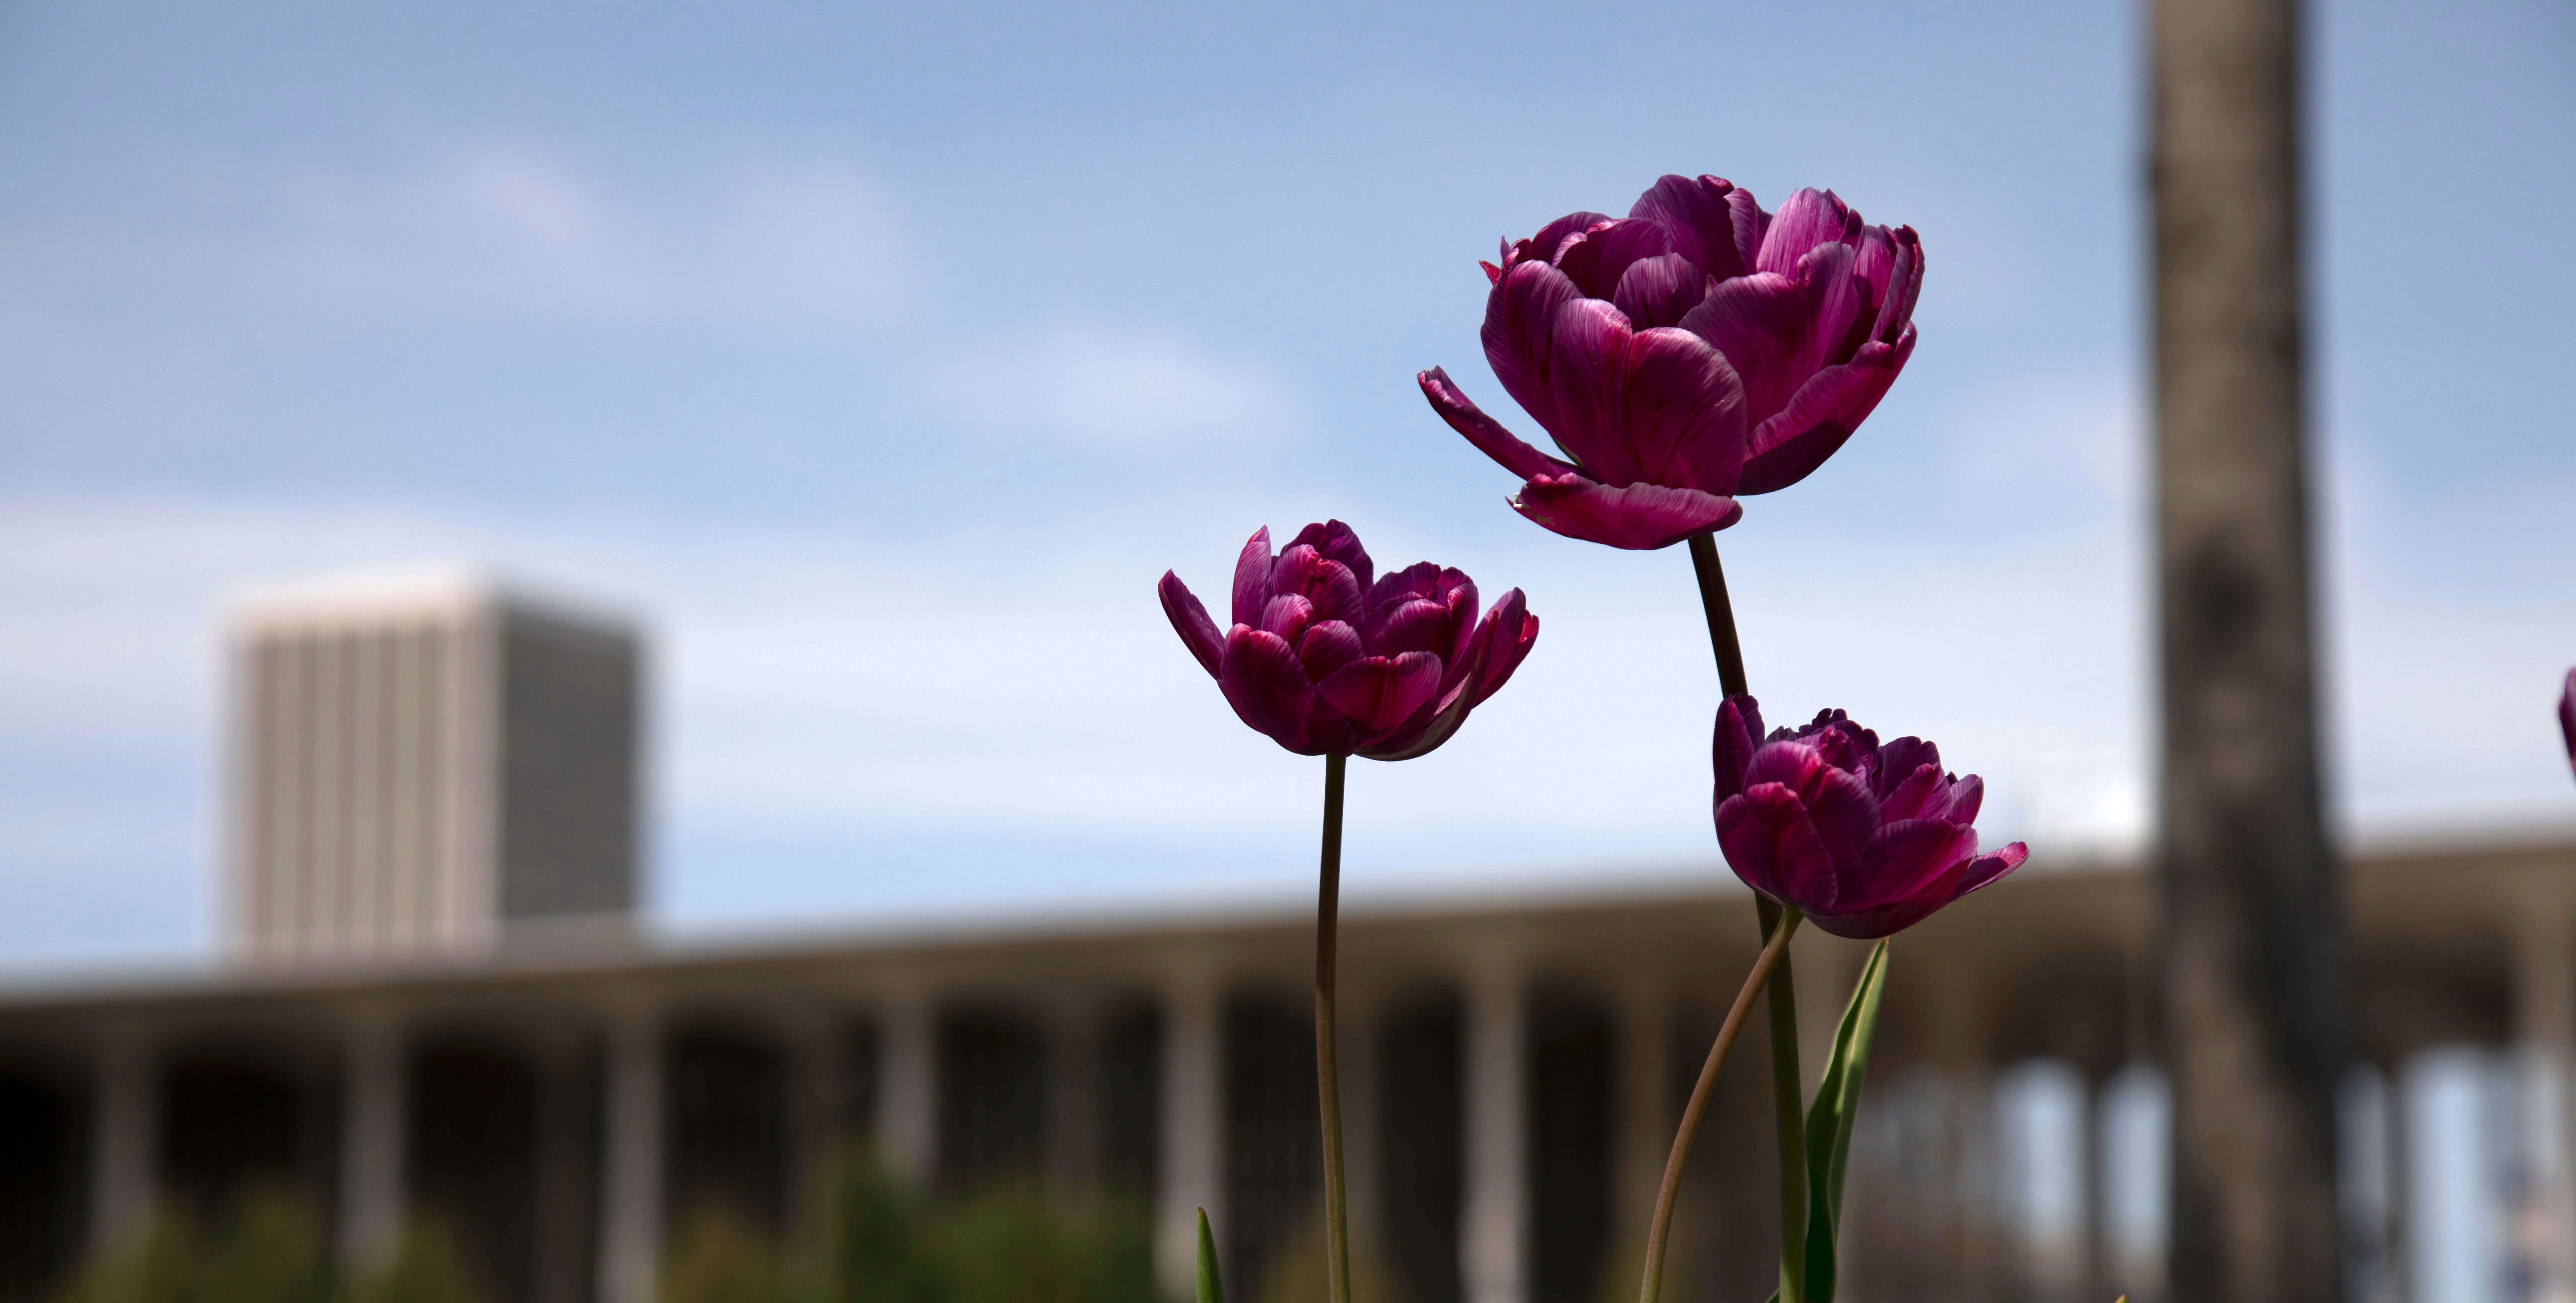 Three purple tulips in the foreground, with a building, greenery and a blue sky in the background.